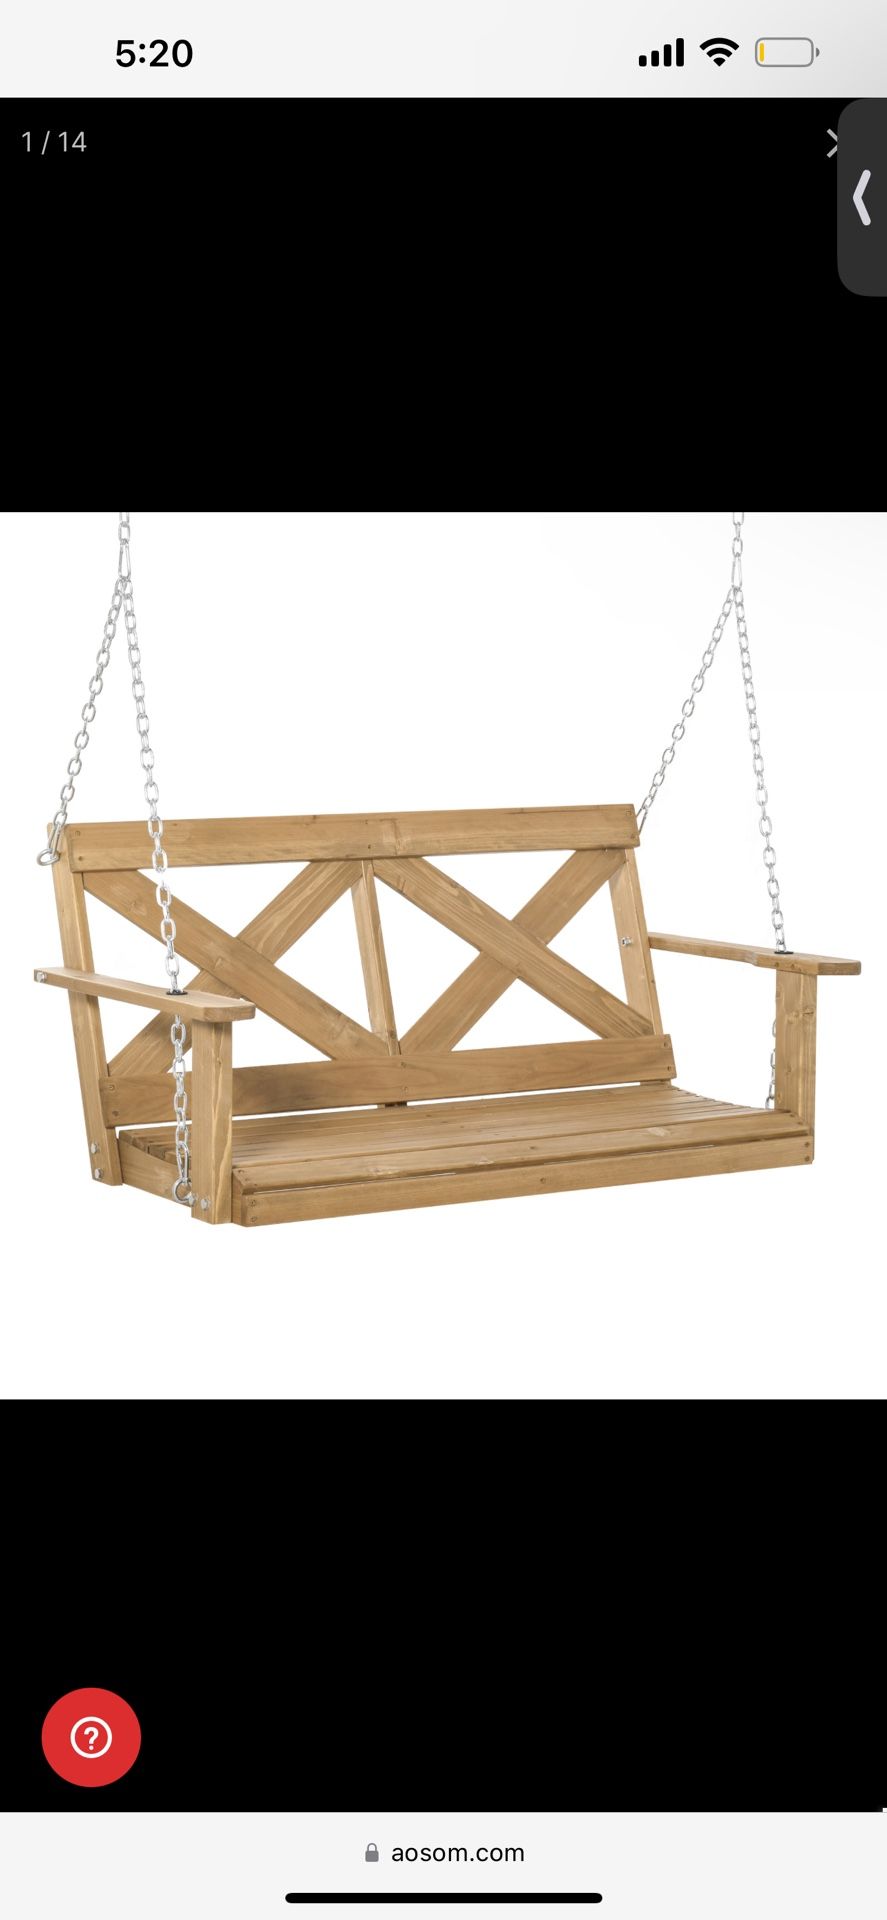 New in box 2 Person Porch Swing, Patio Swing, Outdoor Swing Bench with Pine Wood Frame and Hanging Chains for Garden and Yard, 550 lbs Weight Capacity